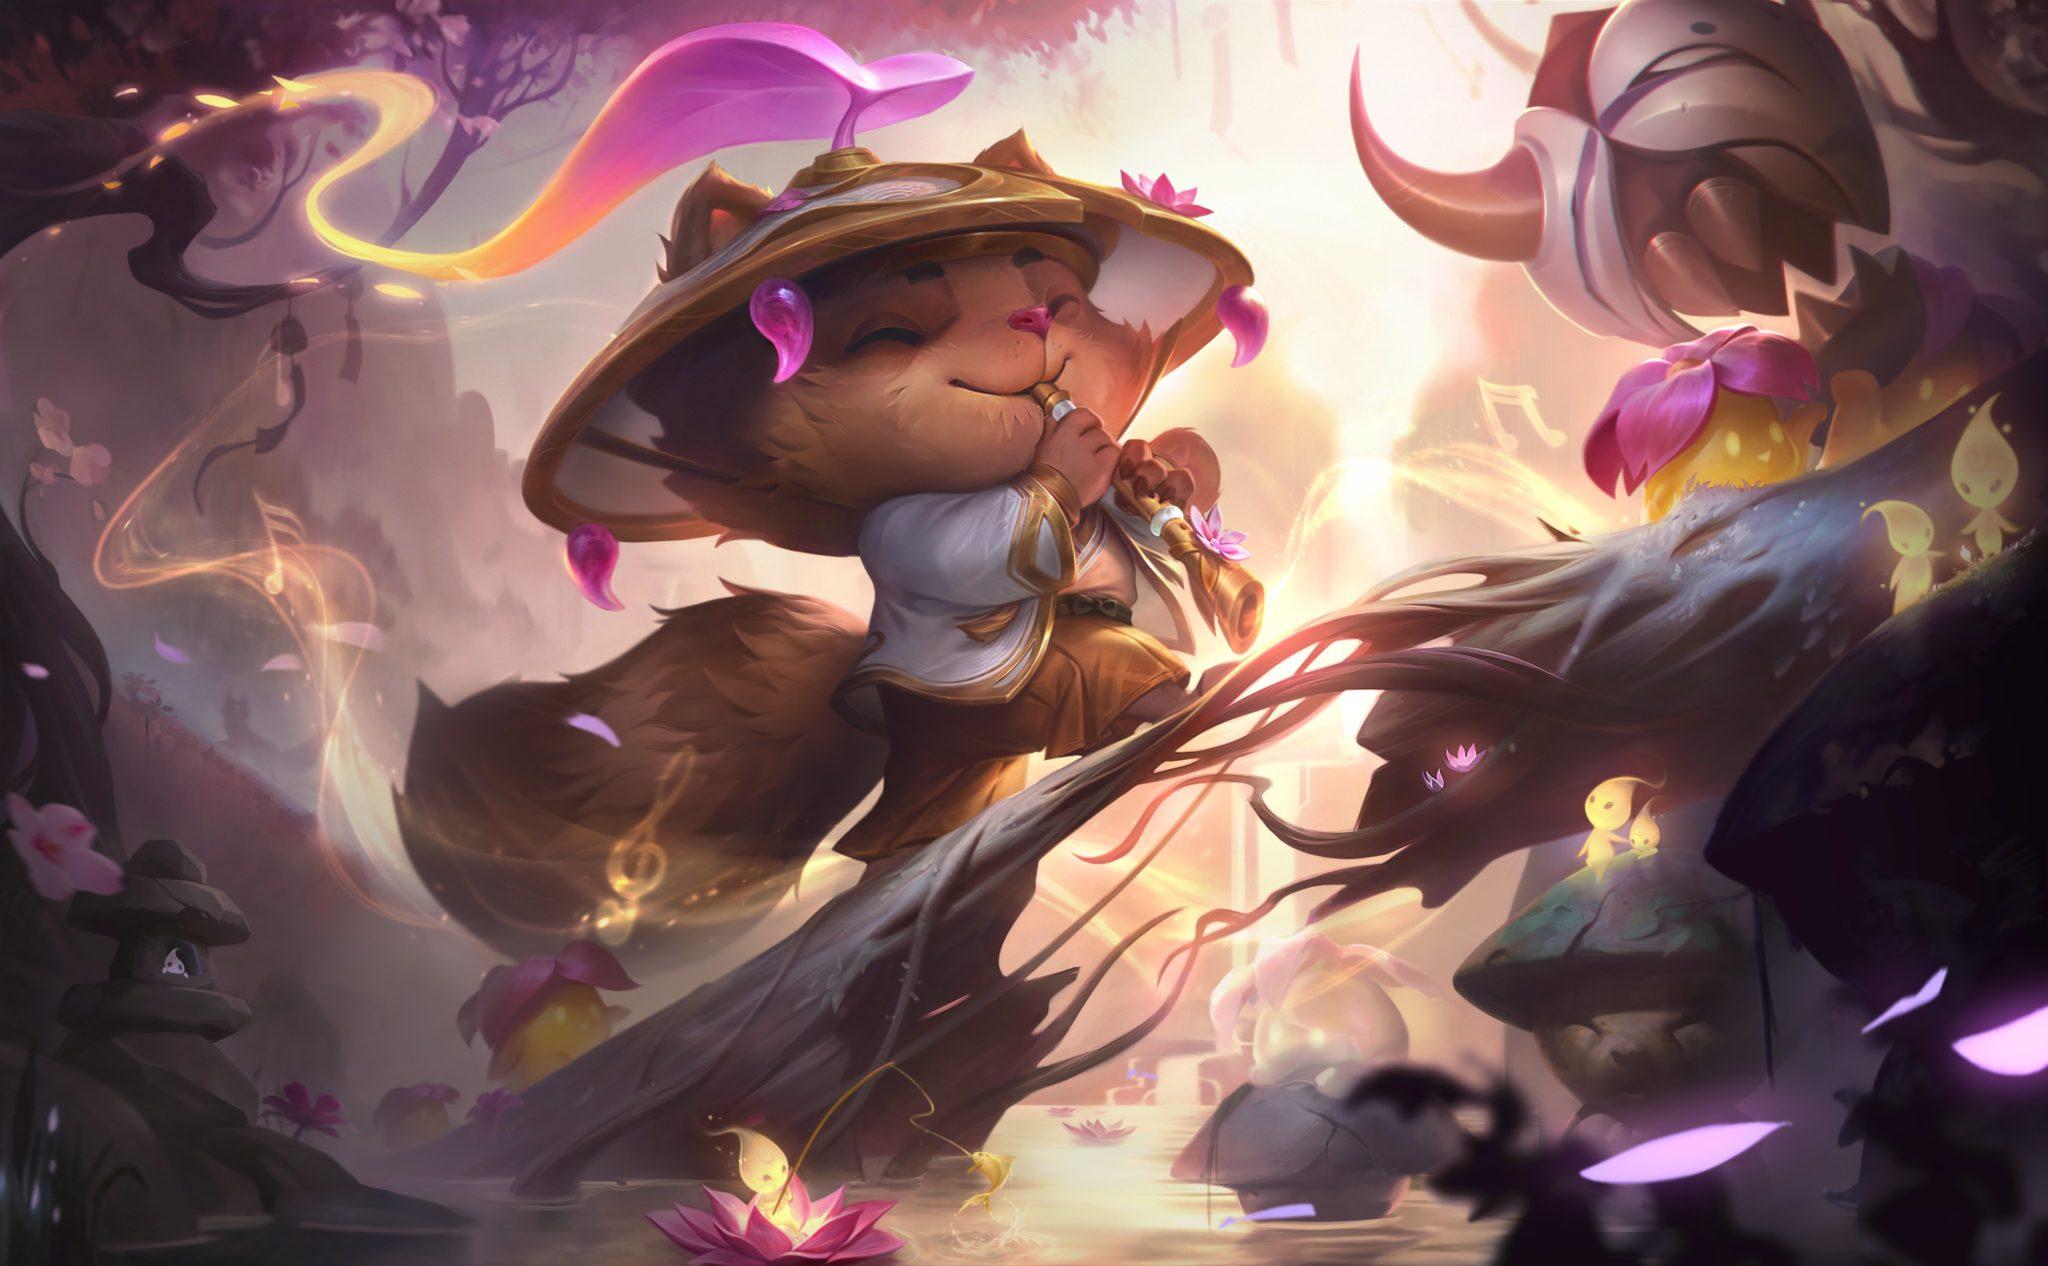 Teemo gets the Spirit Blossom Prestige skin for this event.